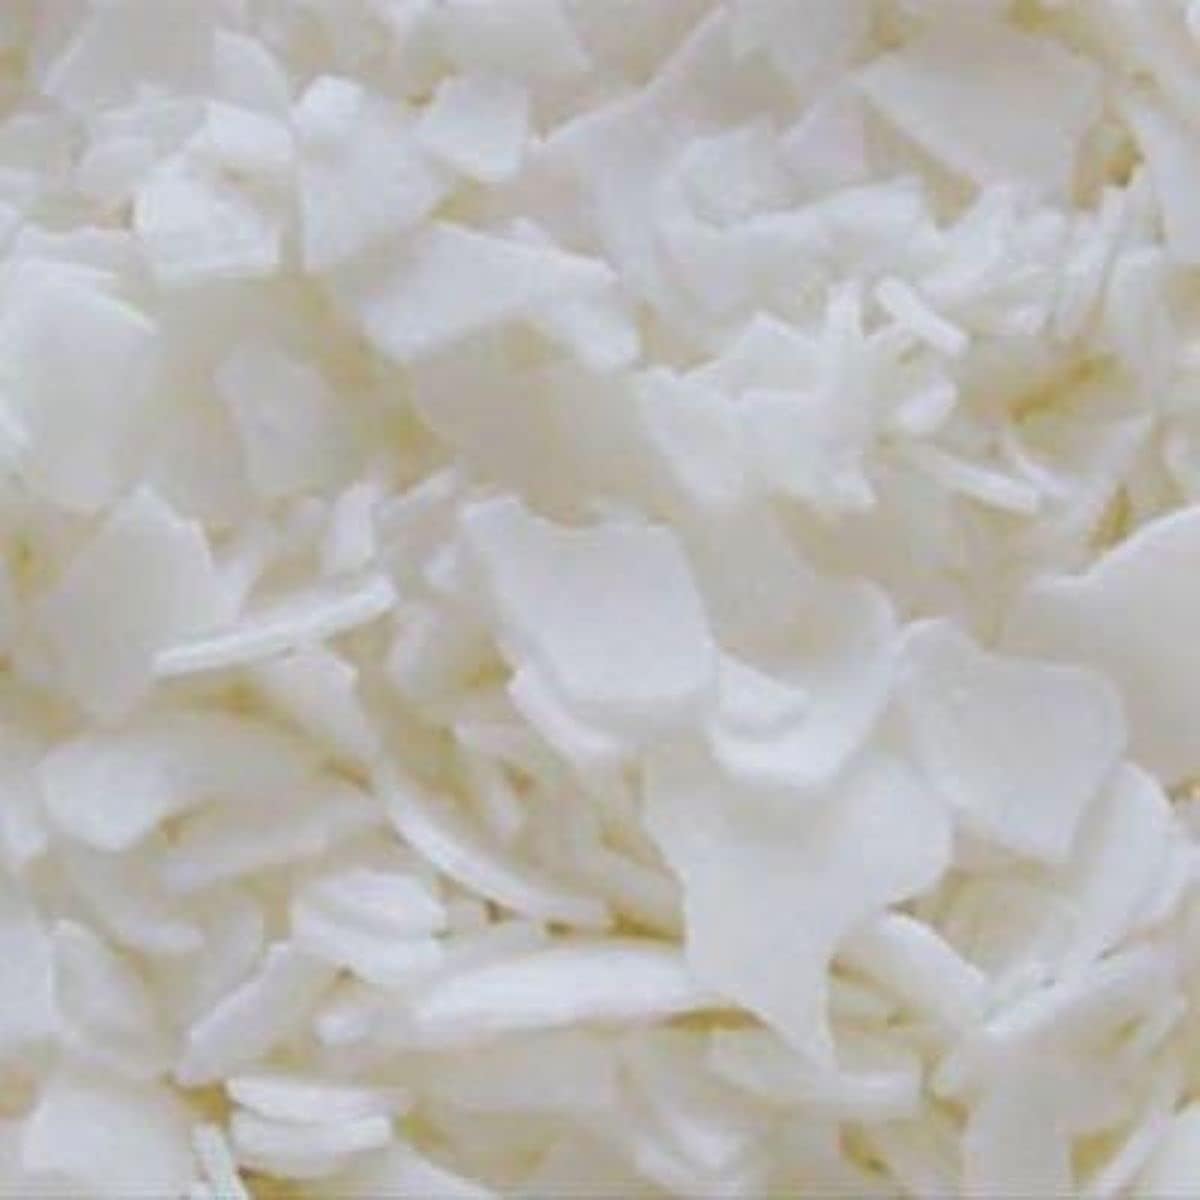 NatureWax C-3 Soy Flakes - 10 LB - Great for Candles, Clamshell Tarts, Snap Bars and Wickless Candles